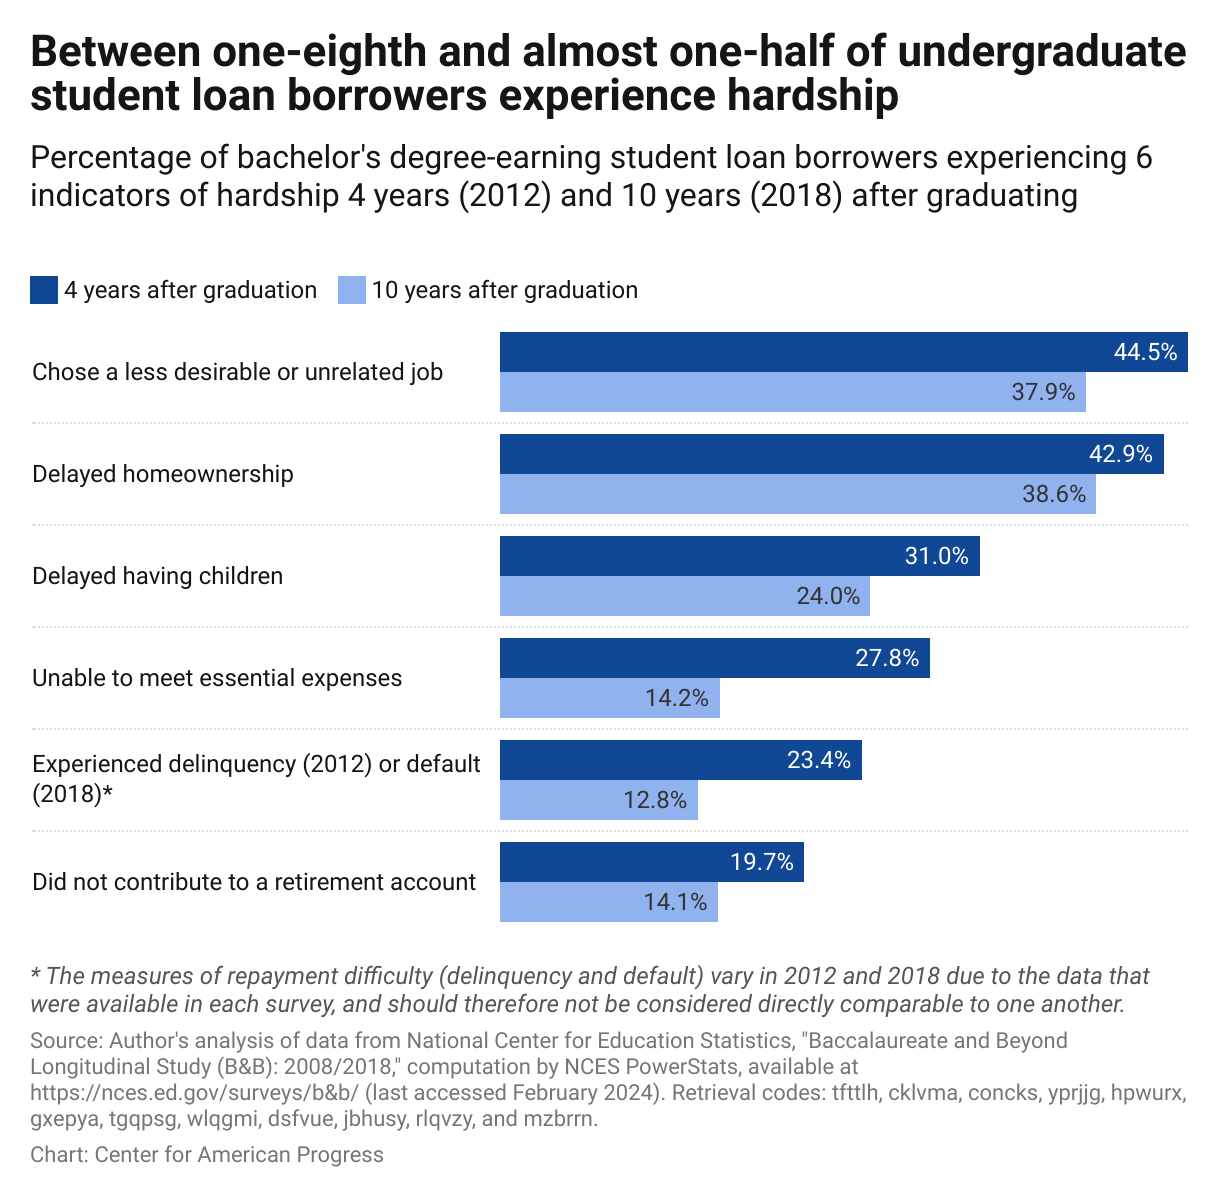 Four years after receiving a bachelor's degree, the percentage of borrowers experiencing hardship varied, from 19.7 percent who did not contribute to a retirement account to 44.5 percent who chose a less desirable or unrelated job; 10 years after graduation, 12.8 percent experienced default while 38.6 percent delayed homeownership.